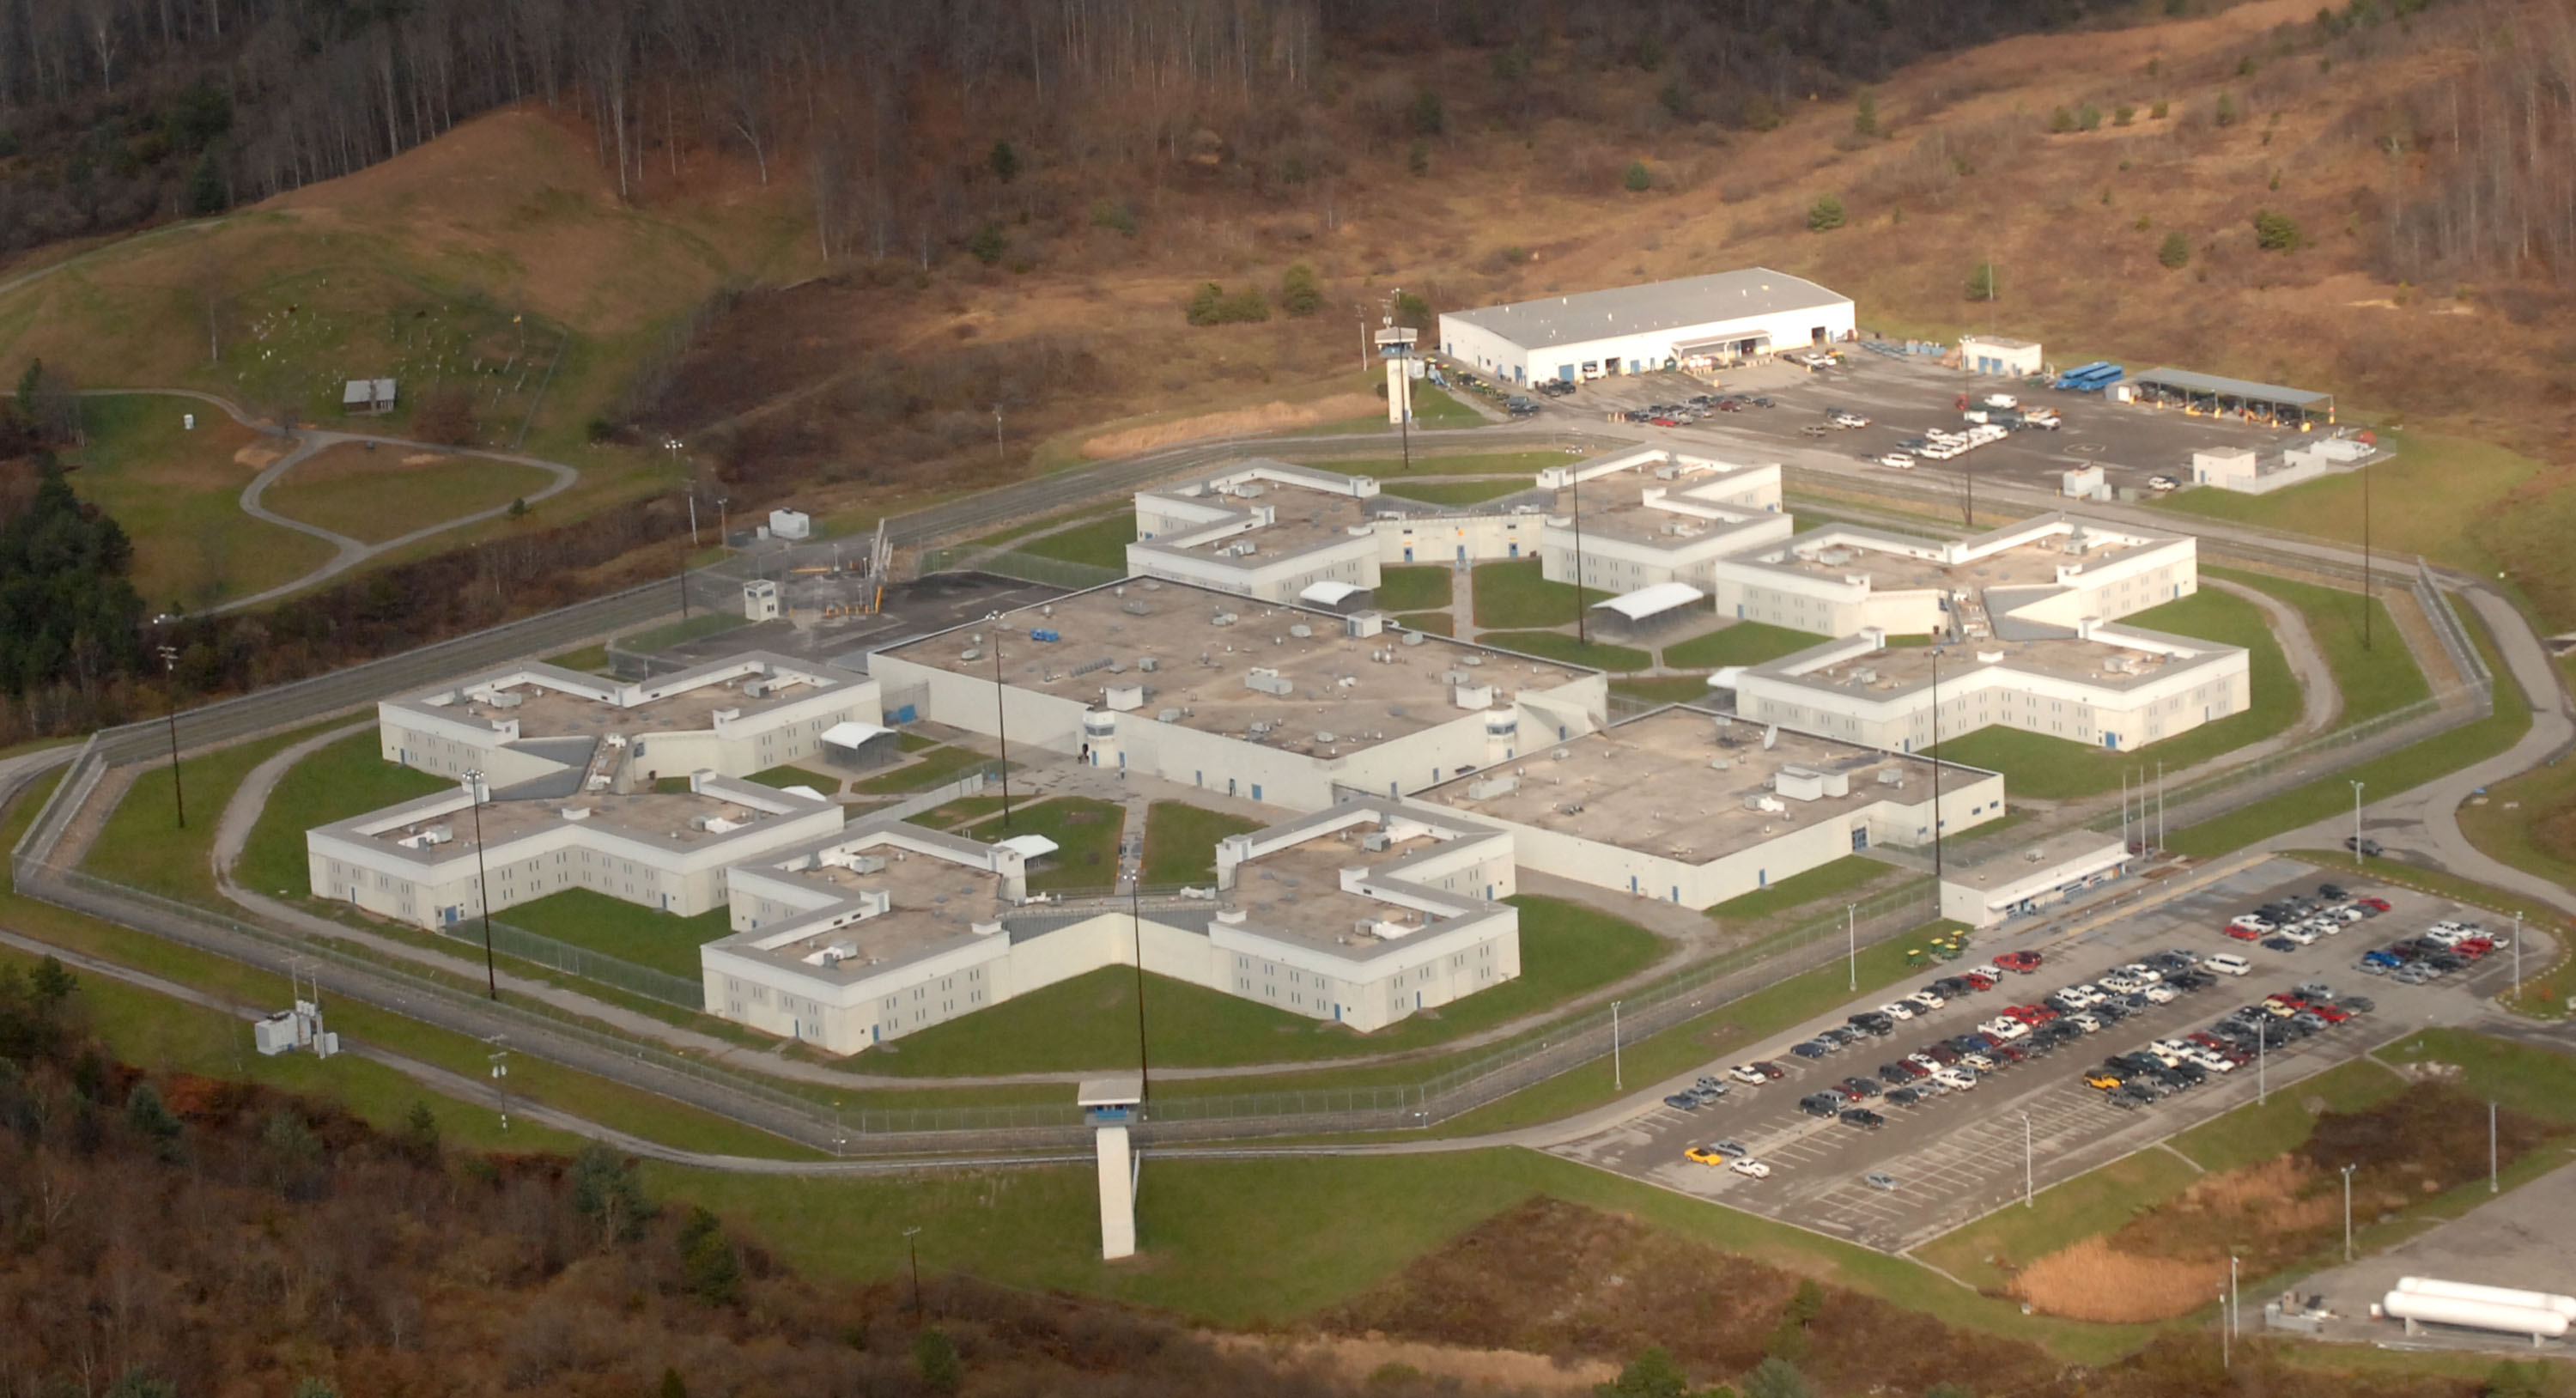 Red Onion State Prison - MEP & FP Engineering Services - DC MD